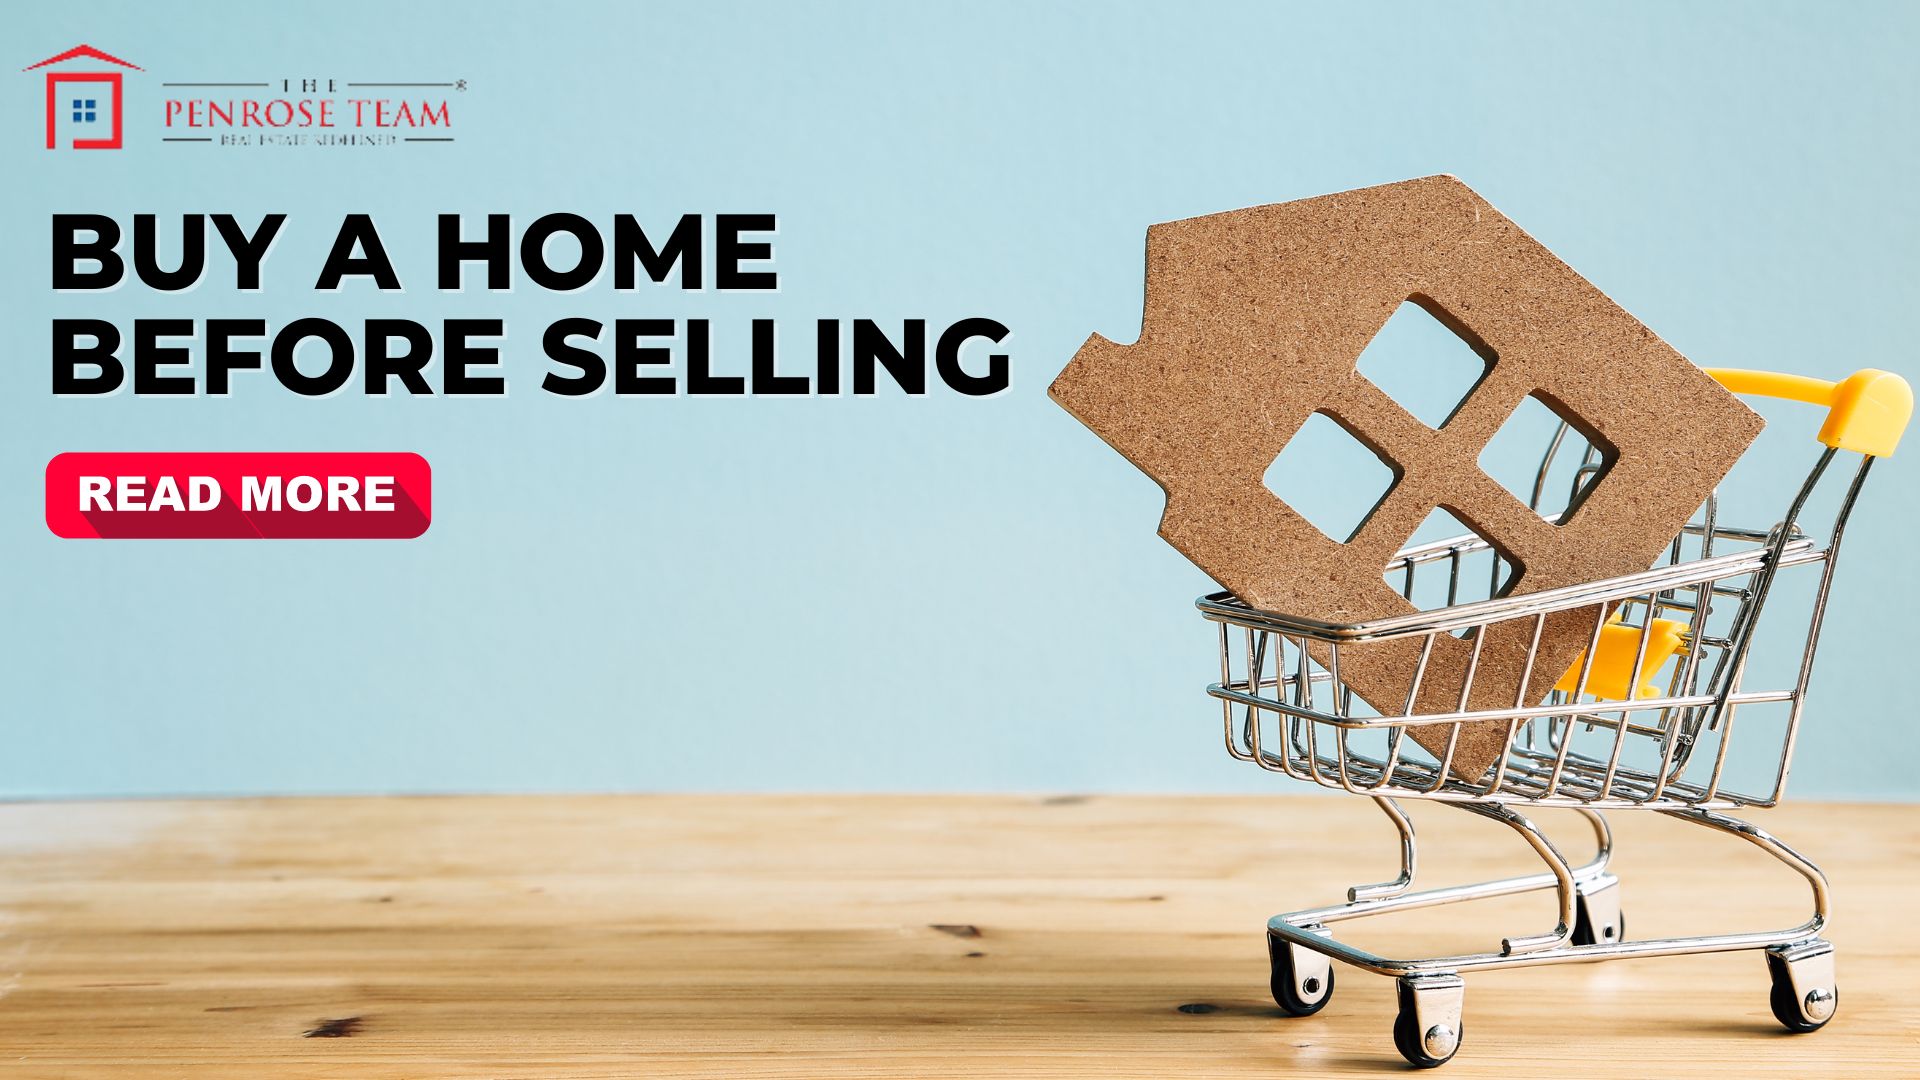 What’s The Best Way To Buy a Home Before Selling?